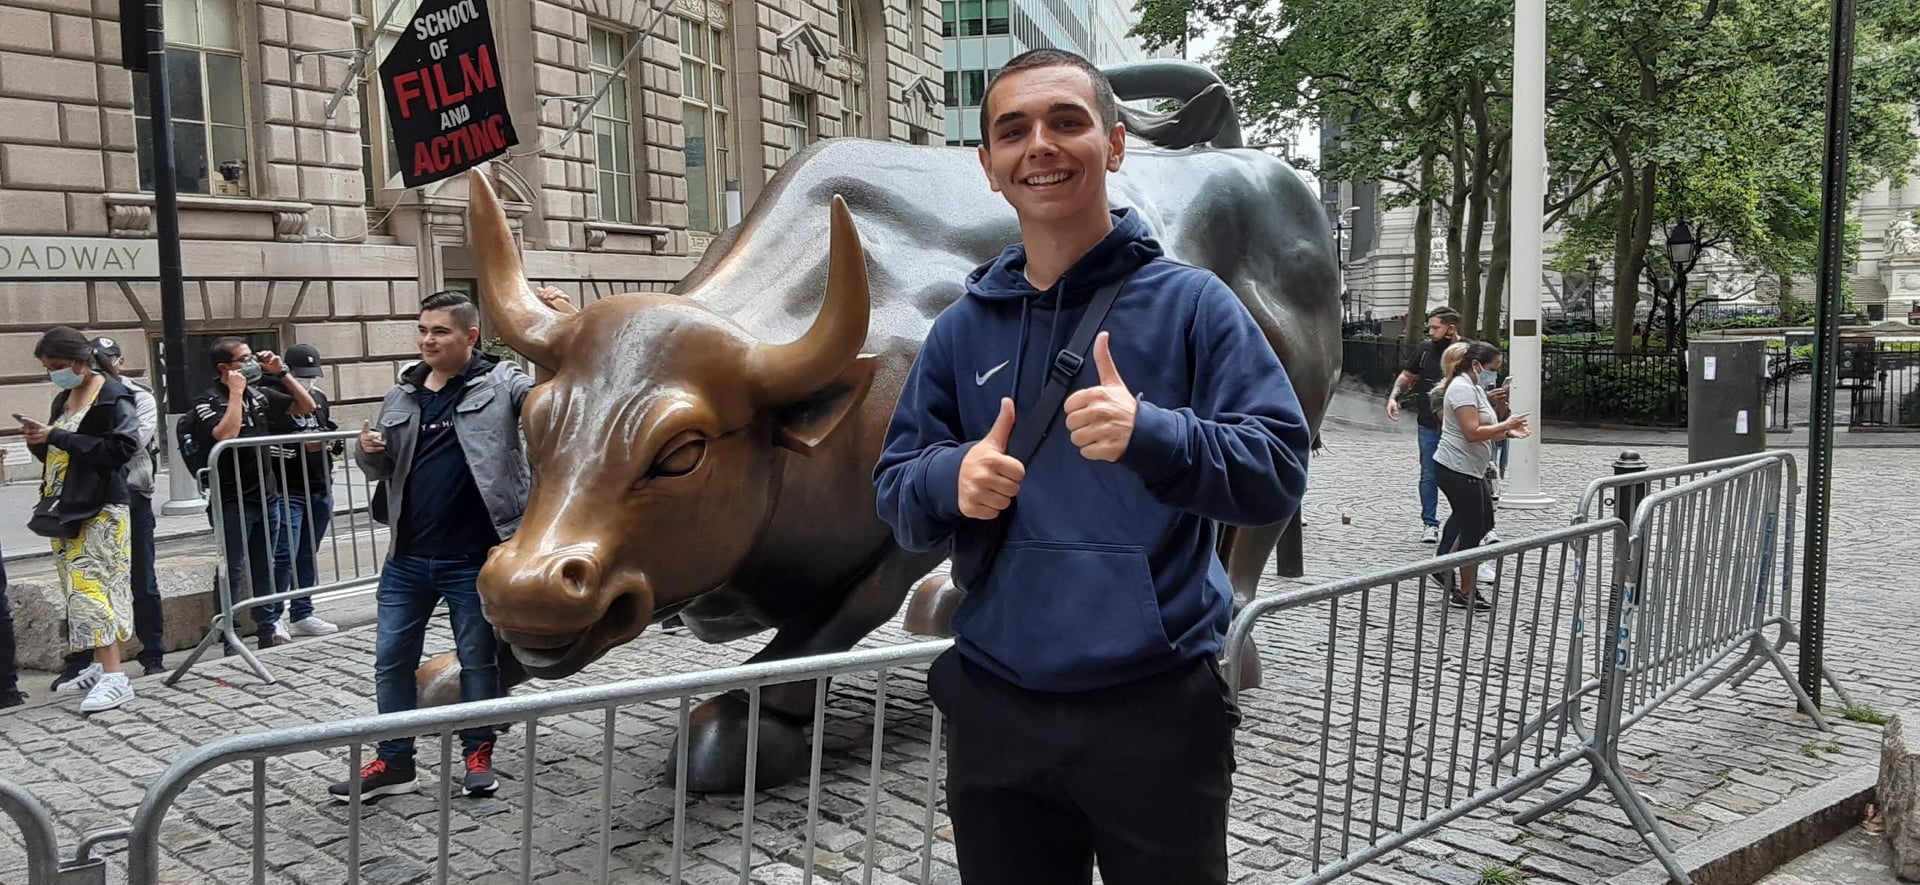 Tourists taking a photo with the Charging Bull in New York